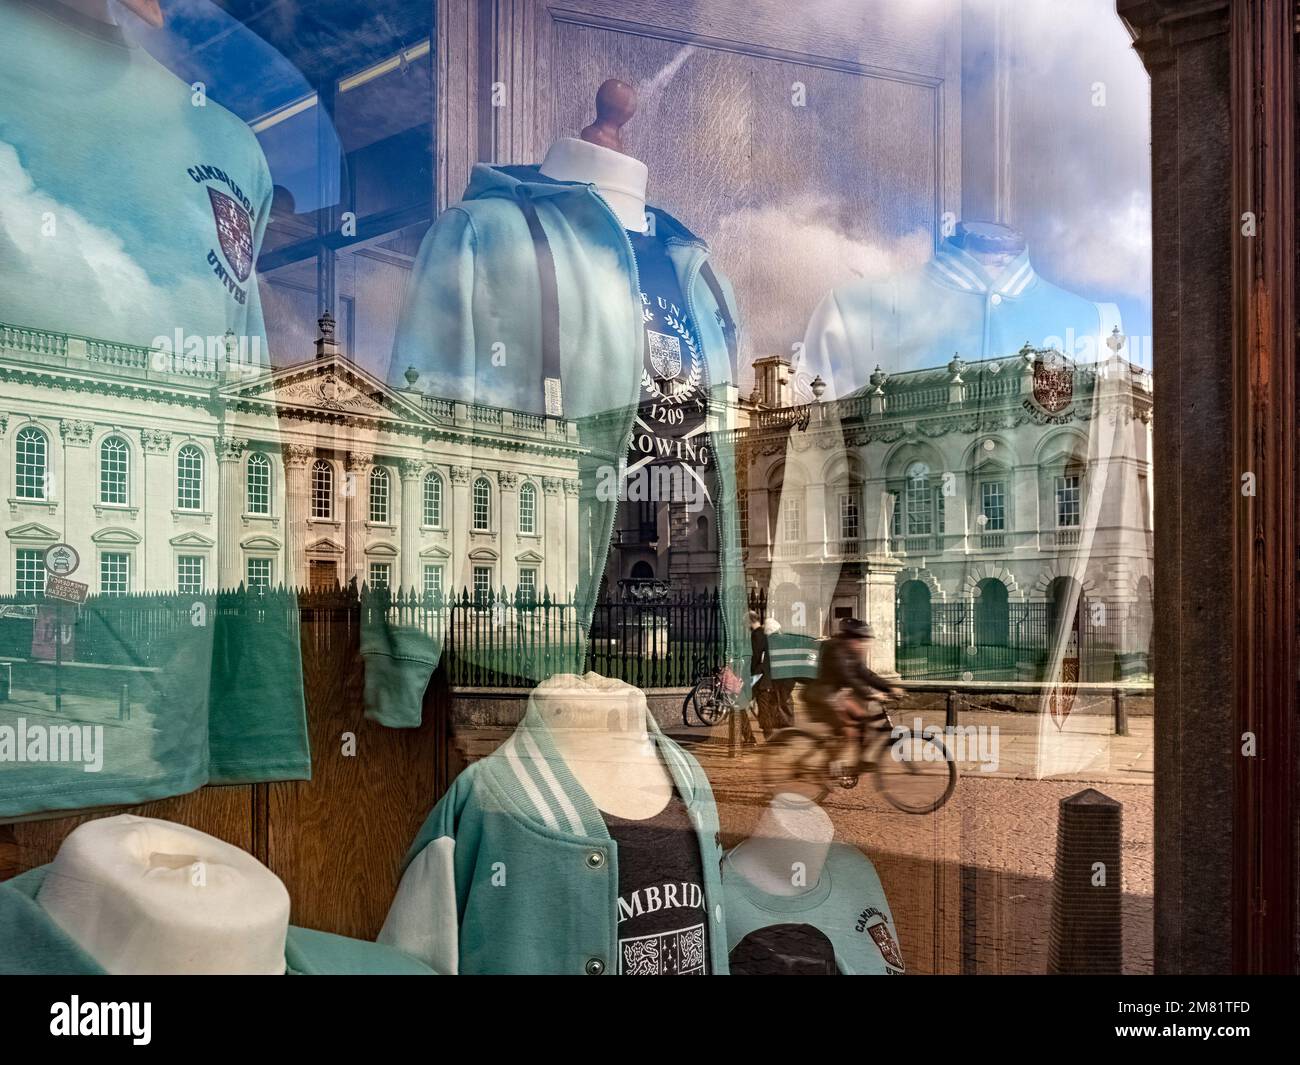 CAMBRIDGE, UK - MARCH 11, 2020:  View of Cambridge University Senate House building reflected in souvenir shop selling branded clothing Stock Photo